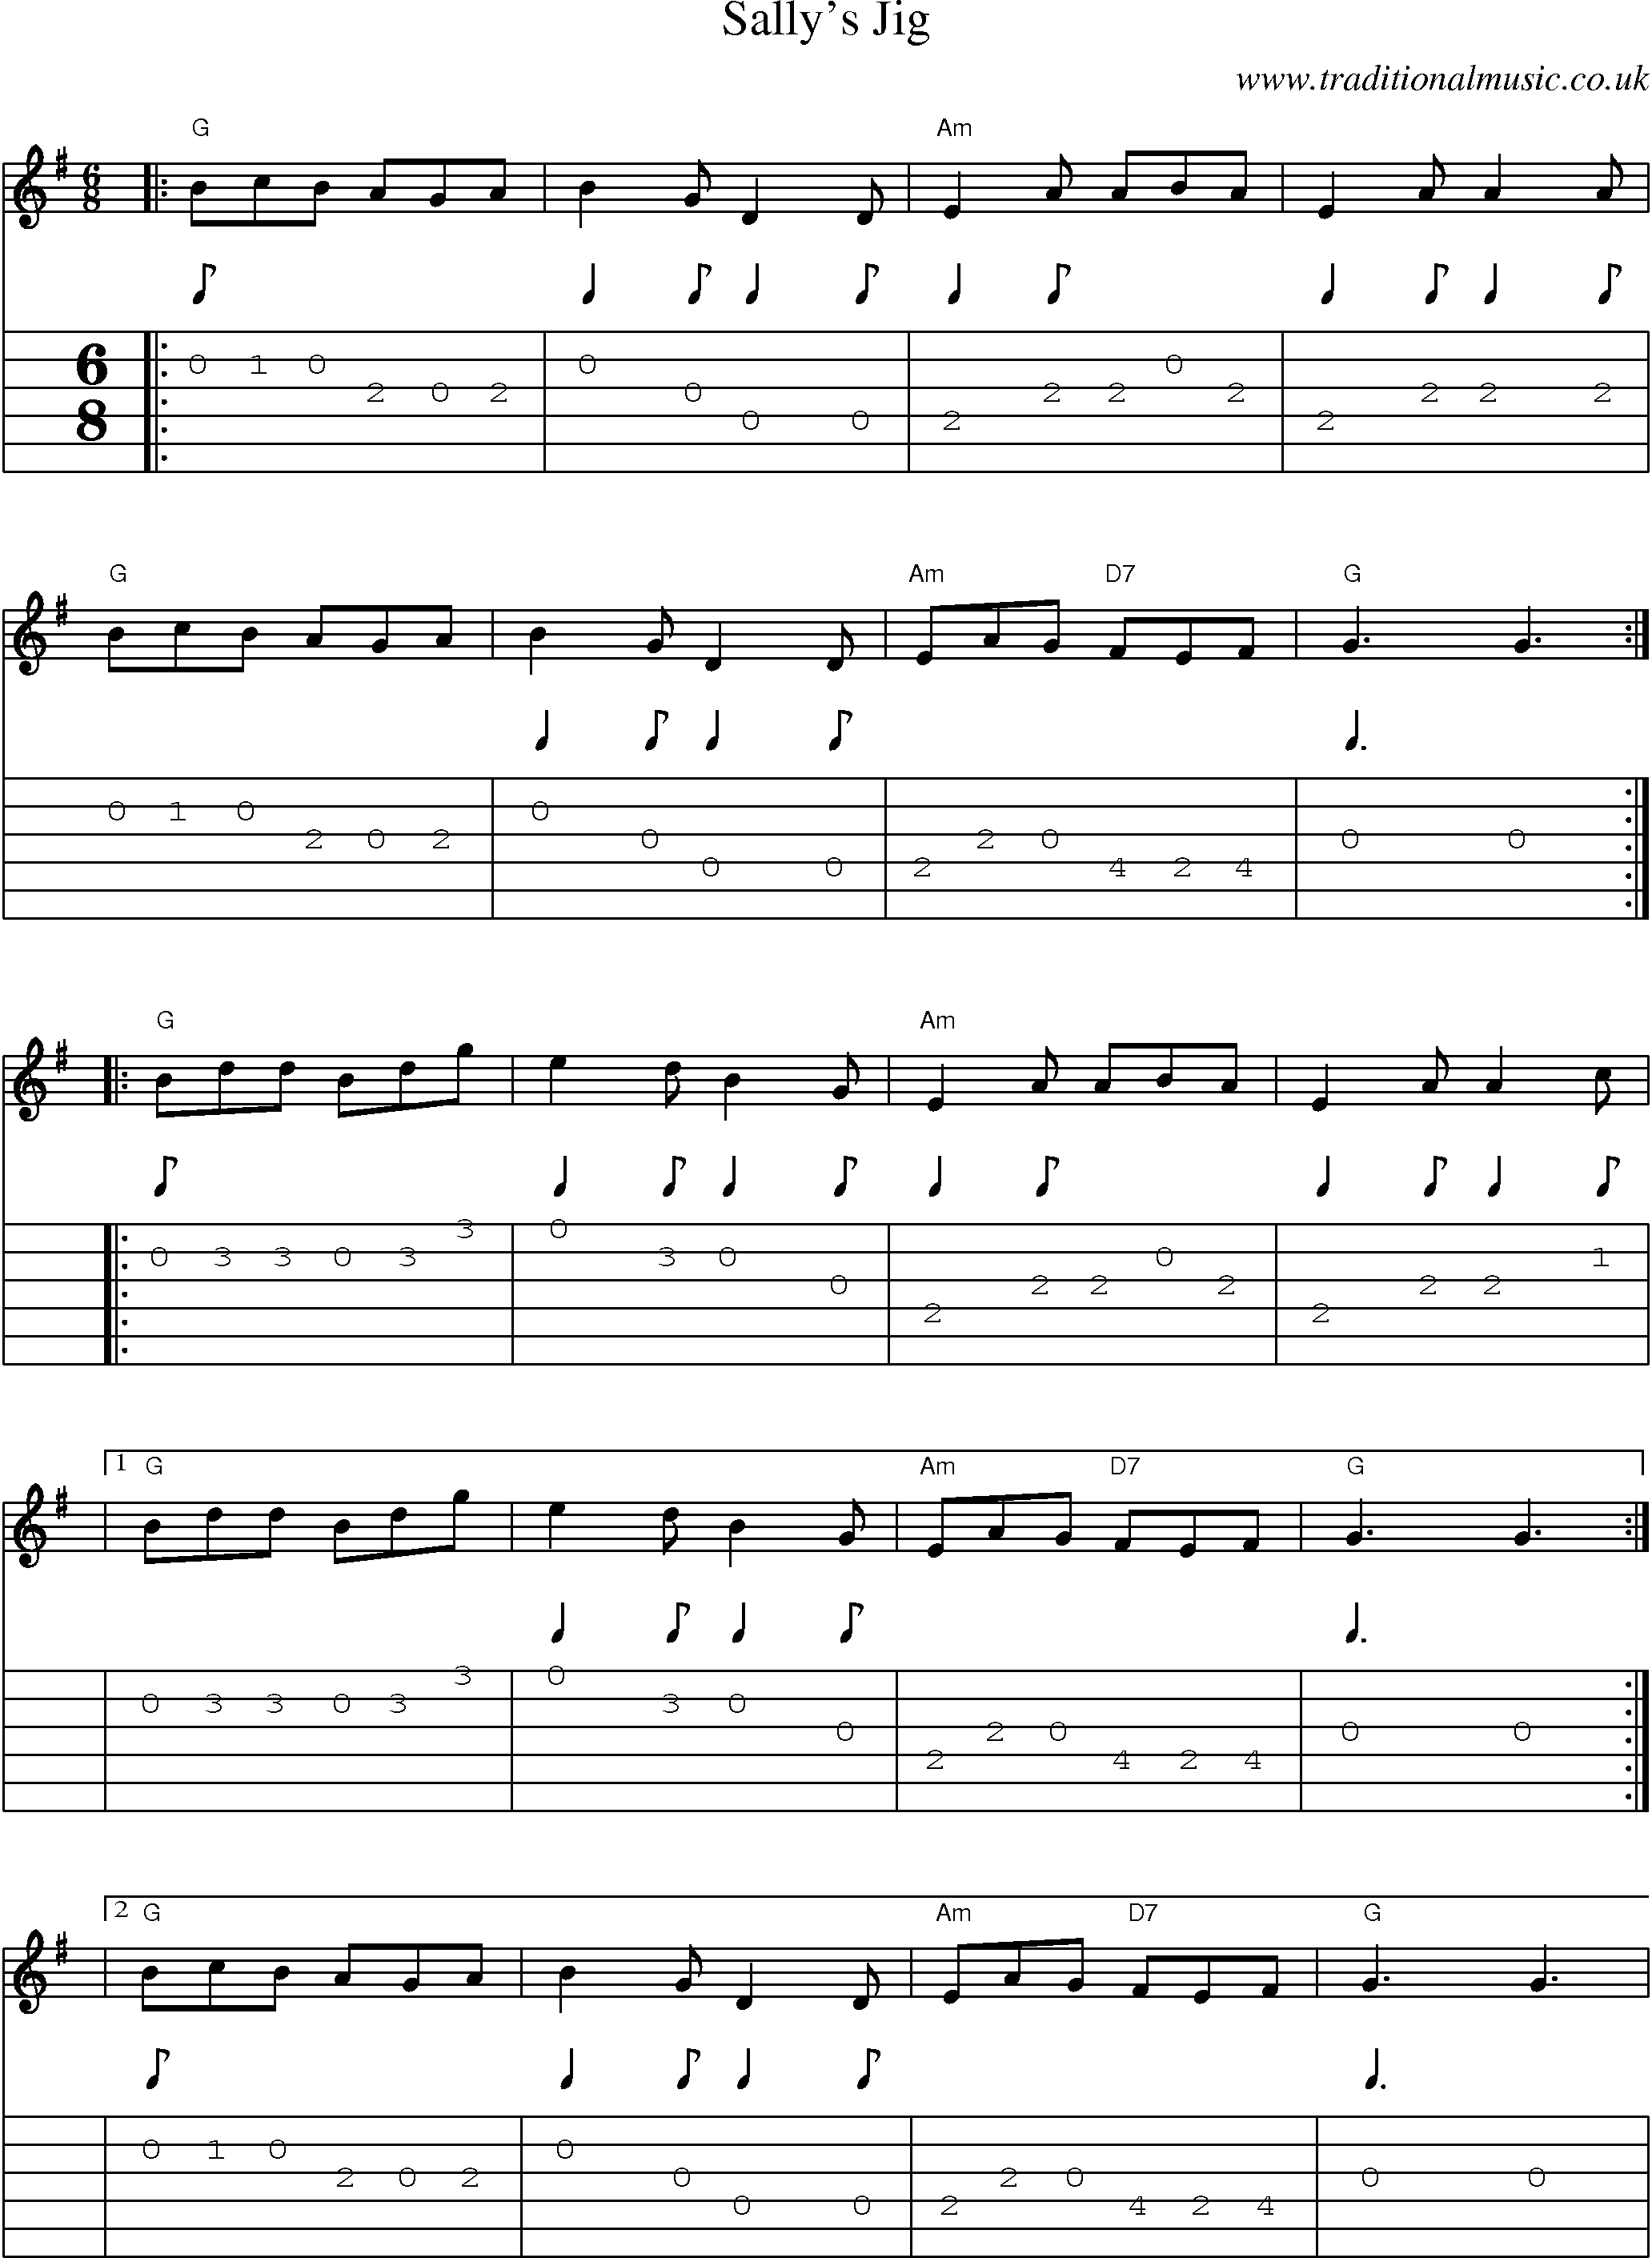 Music Score and Guitar Tabs for Sallys Jig